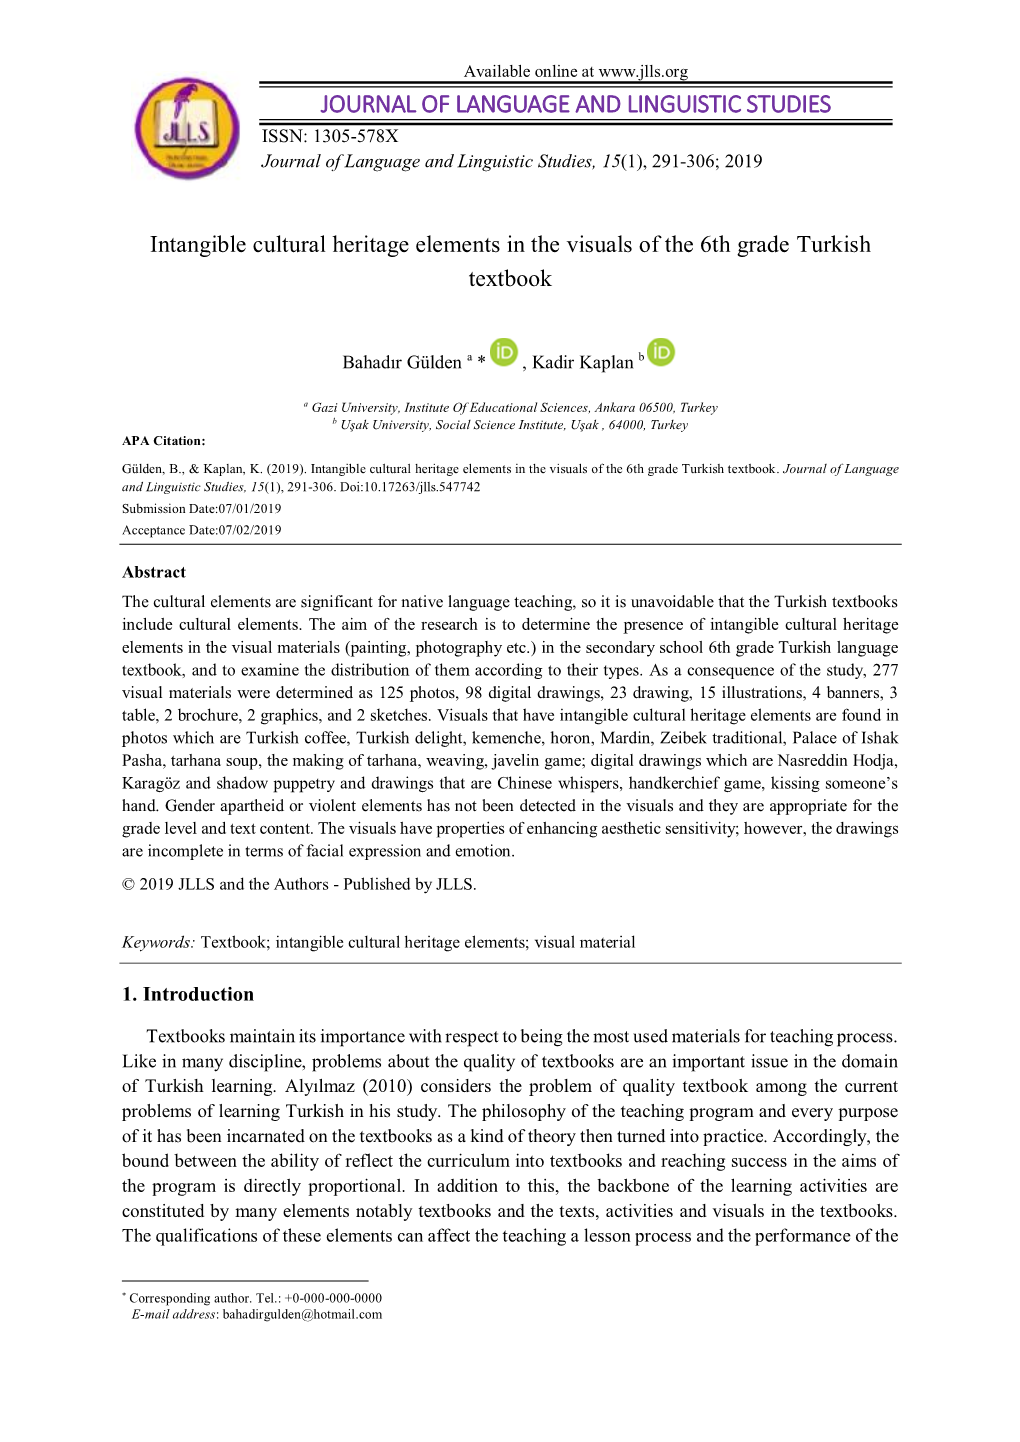 Intangible Cultural Heritage Elements in the Visuals of the 6Th Grade Turkish Textbook